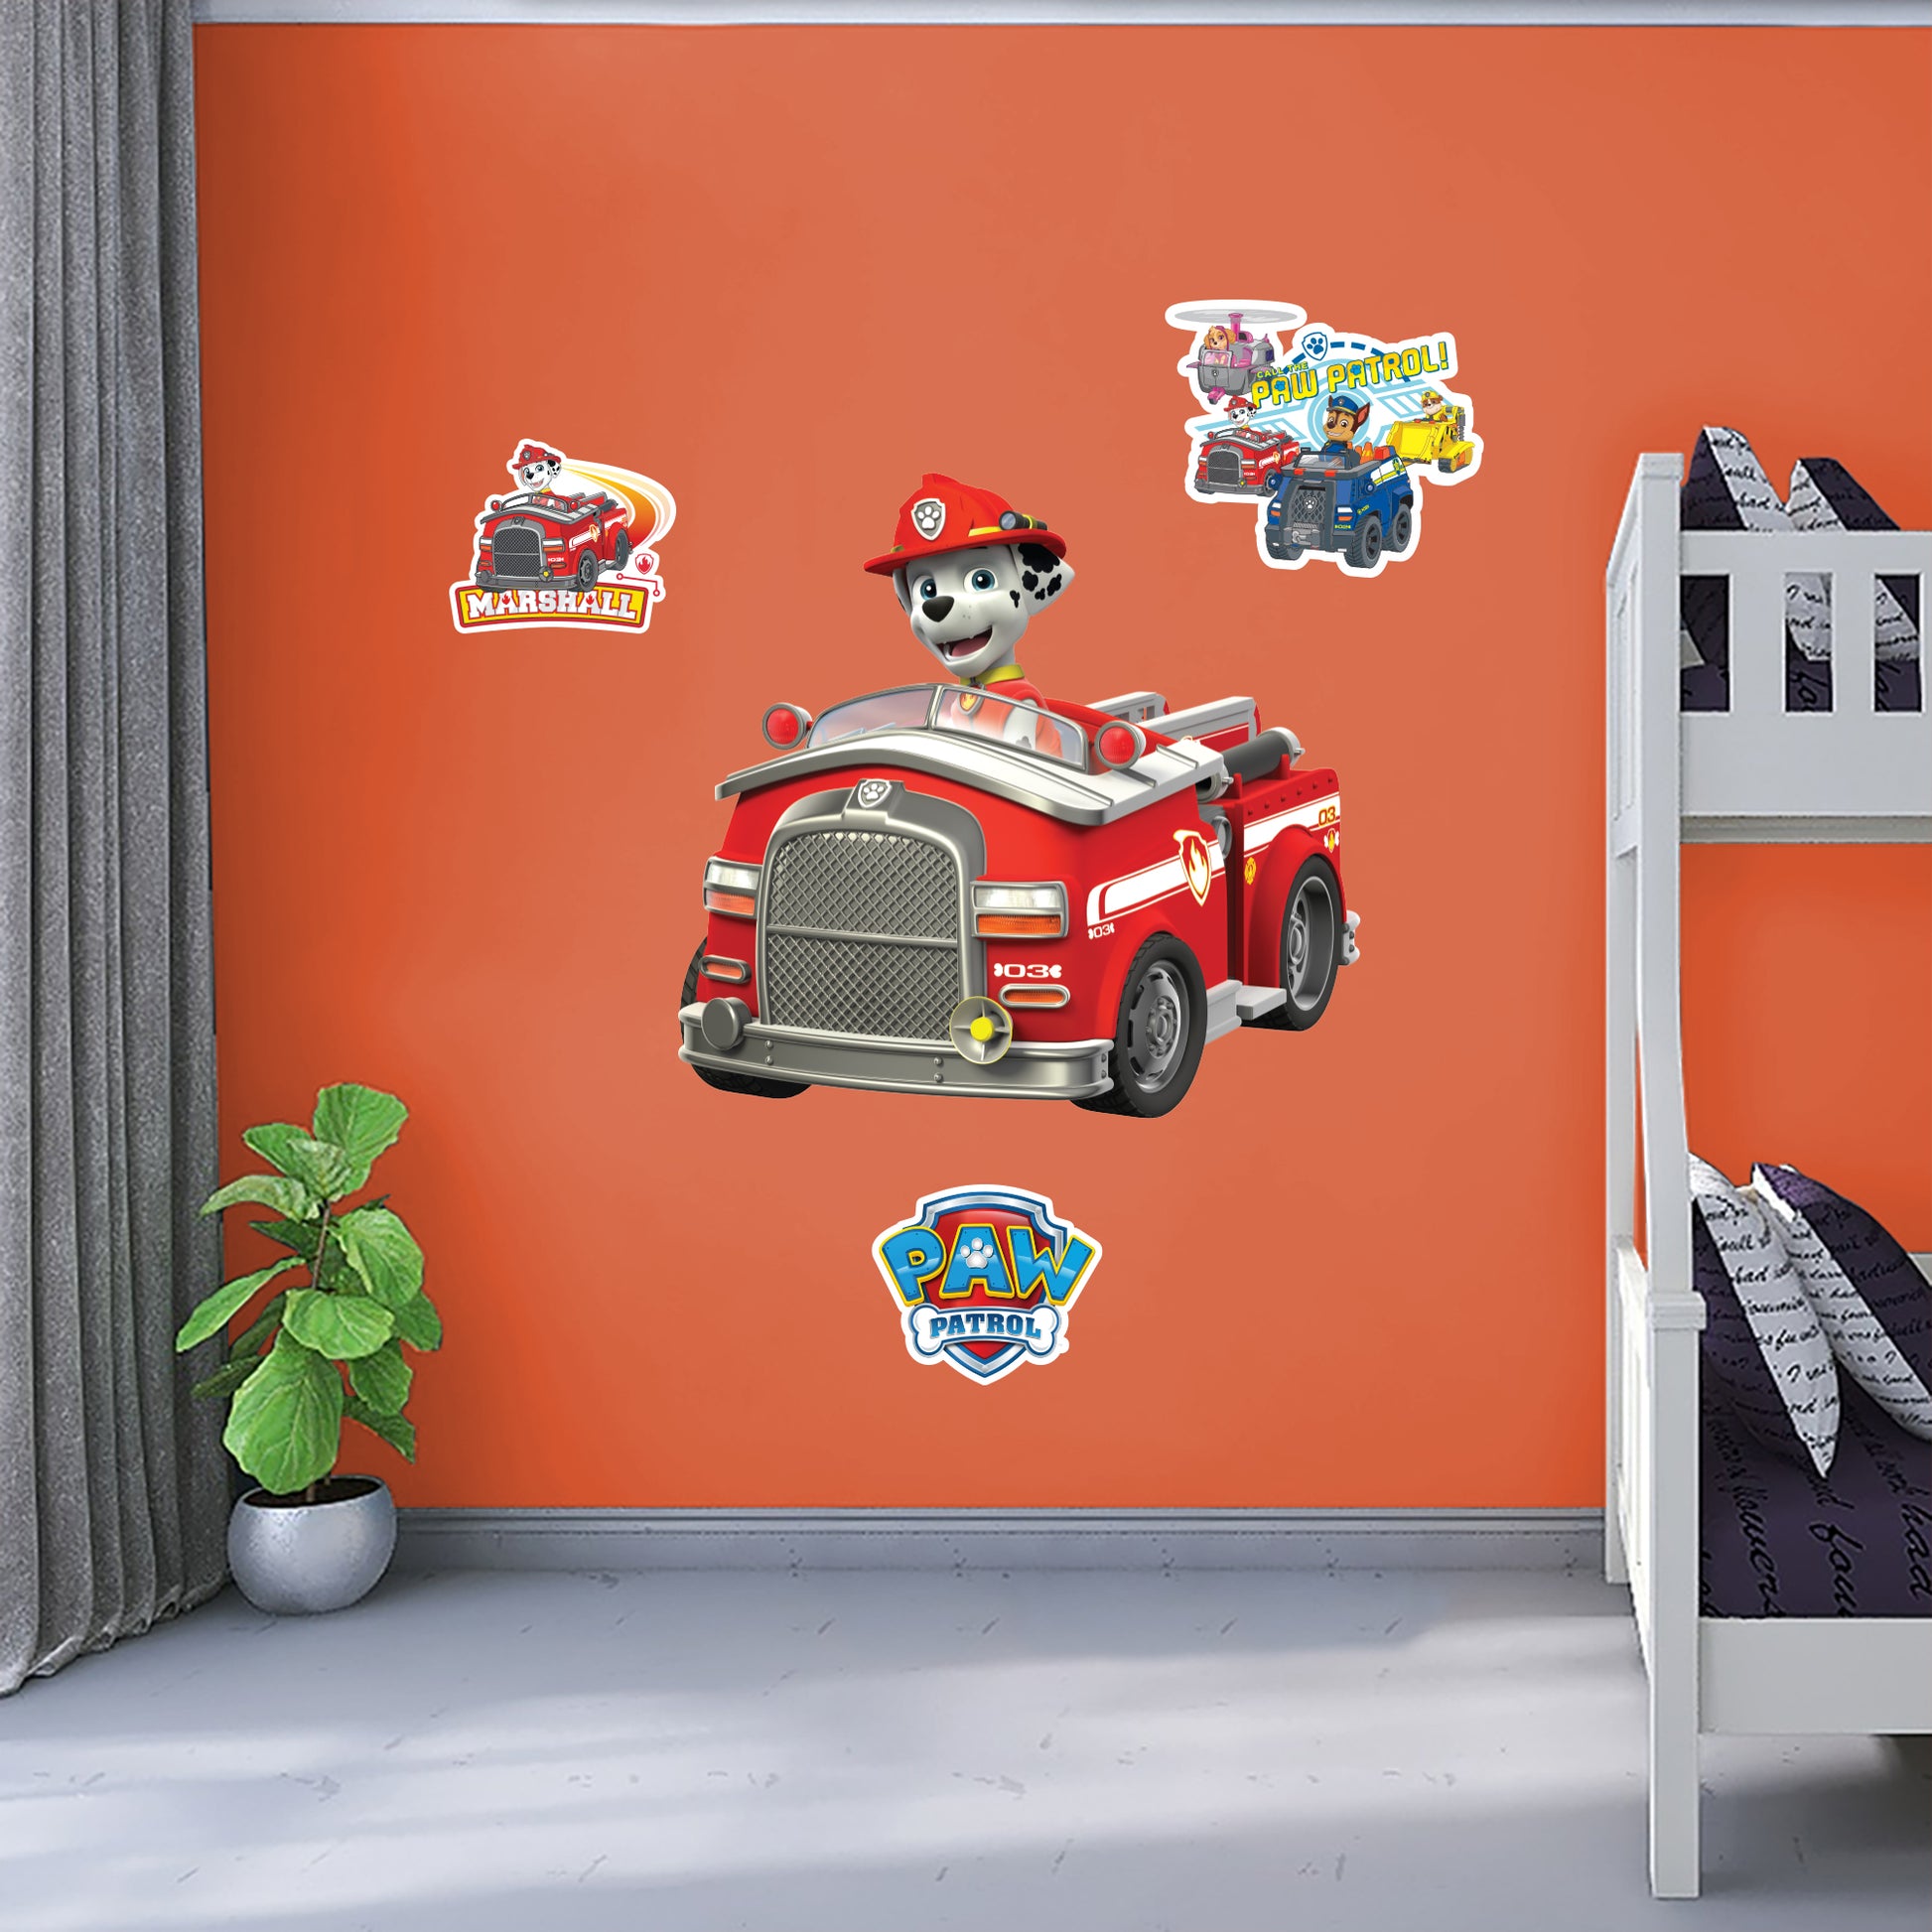 Giant Character +3 Decals  (41"W x 38"H) 